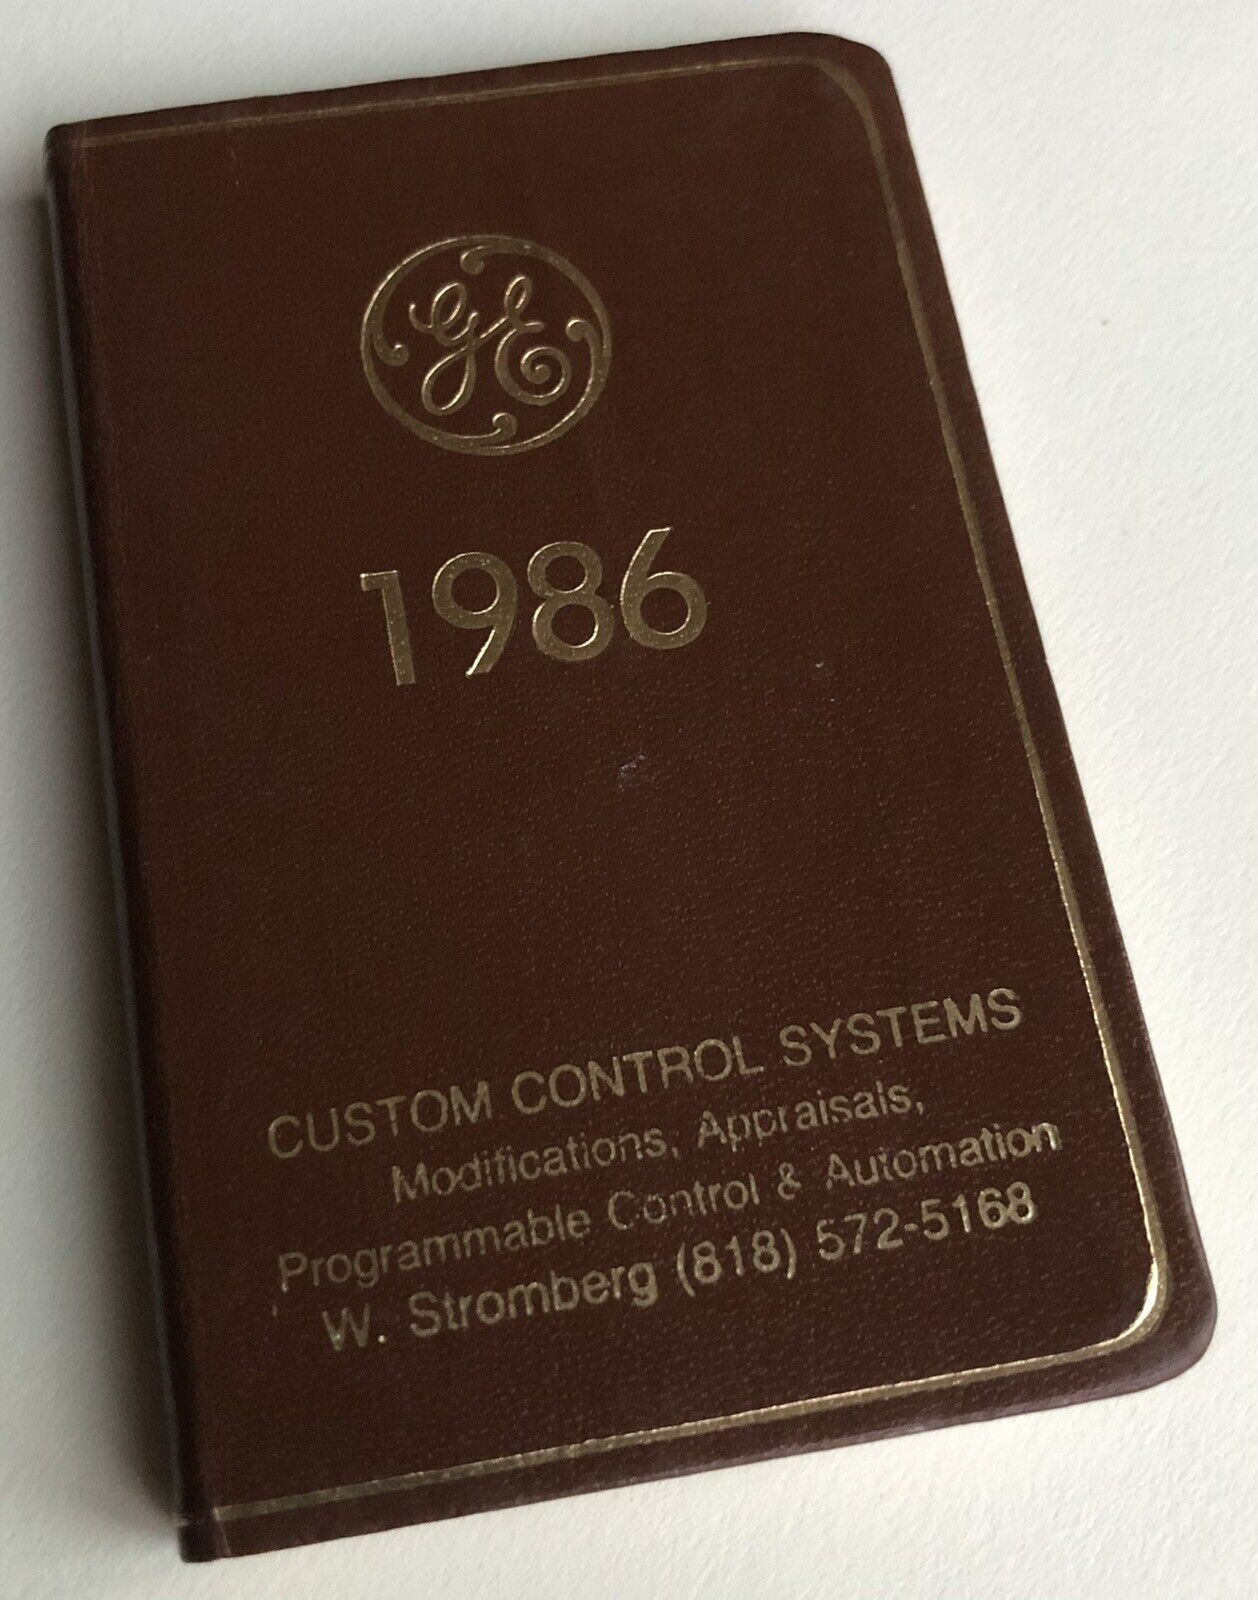 Vintage GE General Electric 1986 Custom Control Systems Reference Date Phone USA